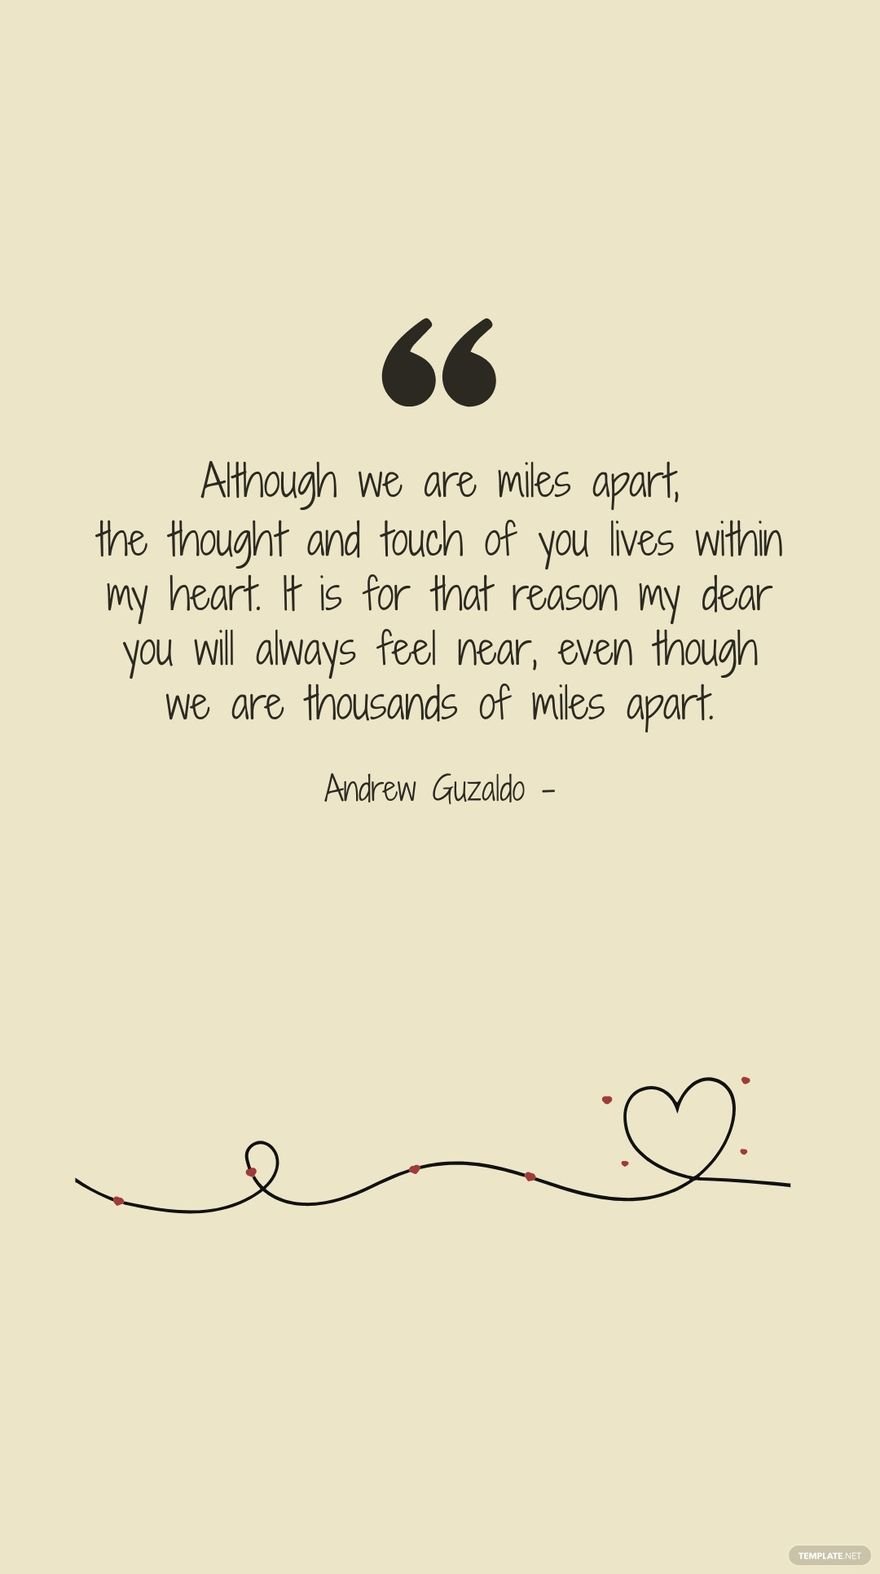 Andrew Guzaldo - Although we are miles apart, the thought and touch of you lives within my heart. It is for that reason my dear you will always feel near, even though we are thousands of miles apart.